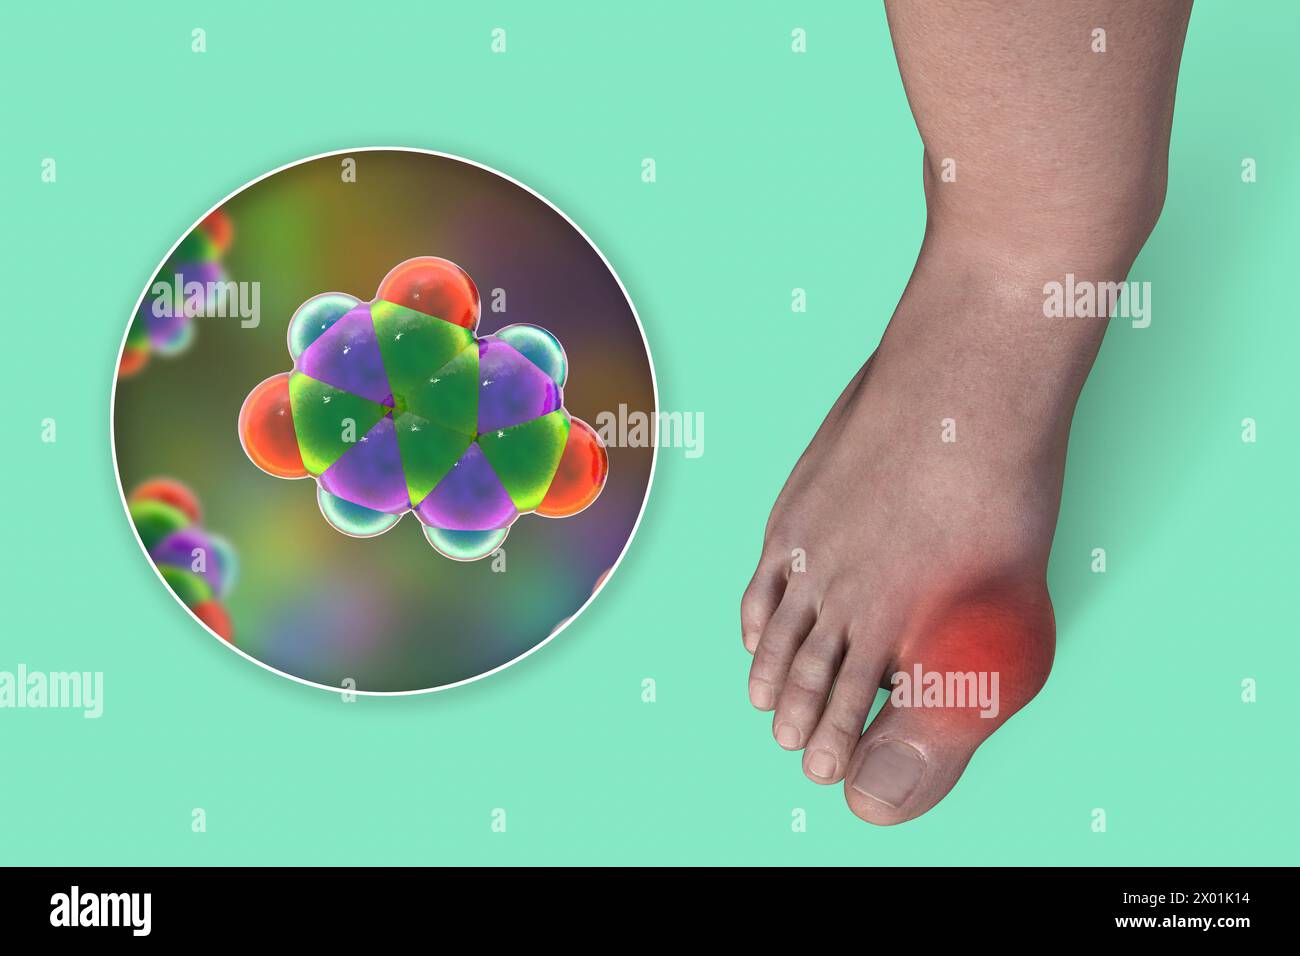 Illustration of gout-afflicted foot and close-up view of uric acid molecule, revealing the destructive impact of chronic uric acid crystal deposition. Stock Photo